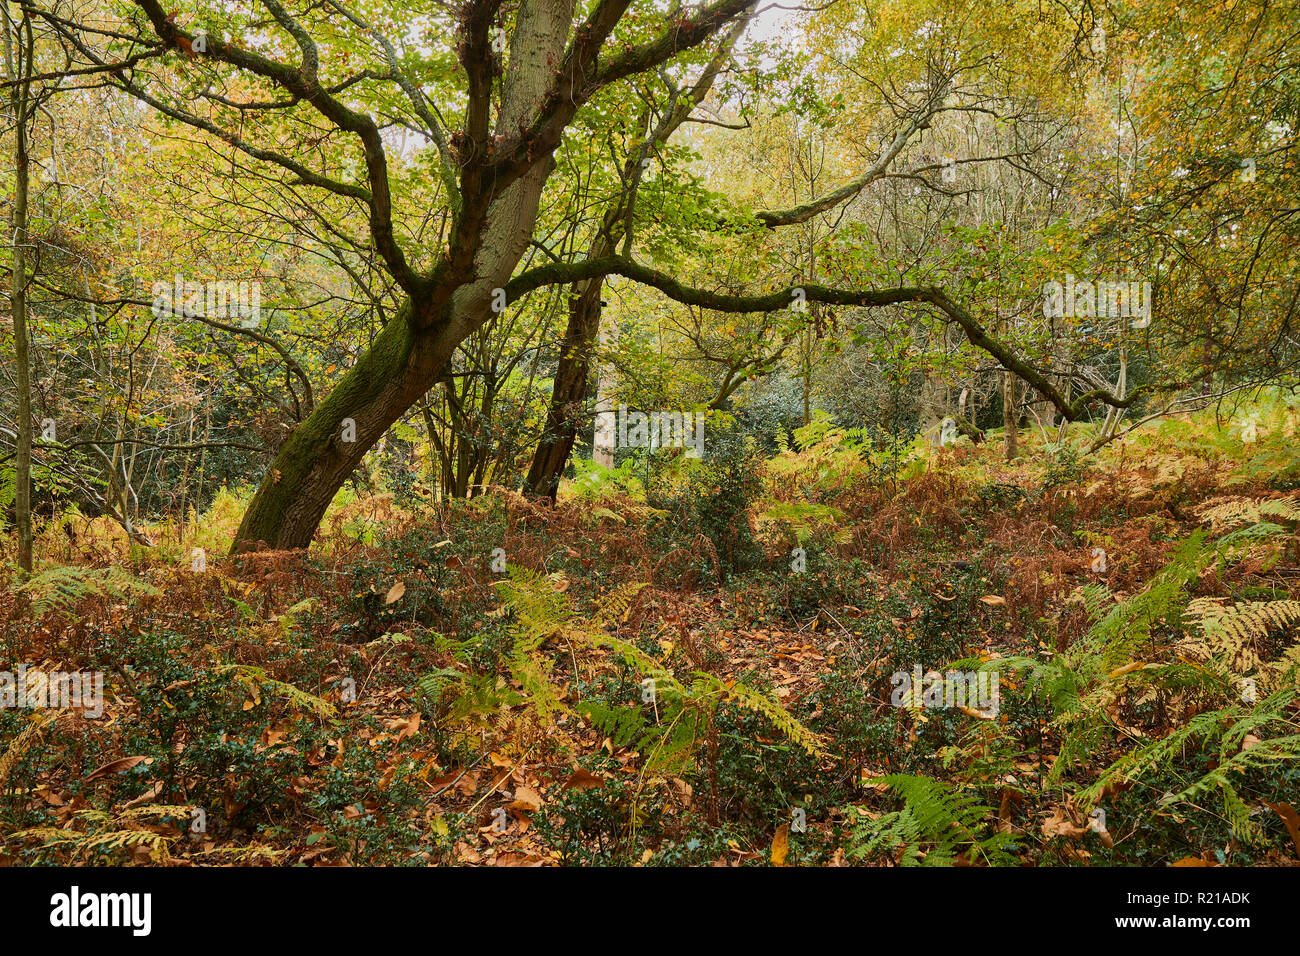 A woodland scene with leaves on the trees and ferns changing colour due to the season of autumn Stock Photo